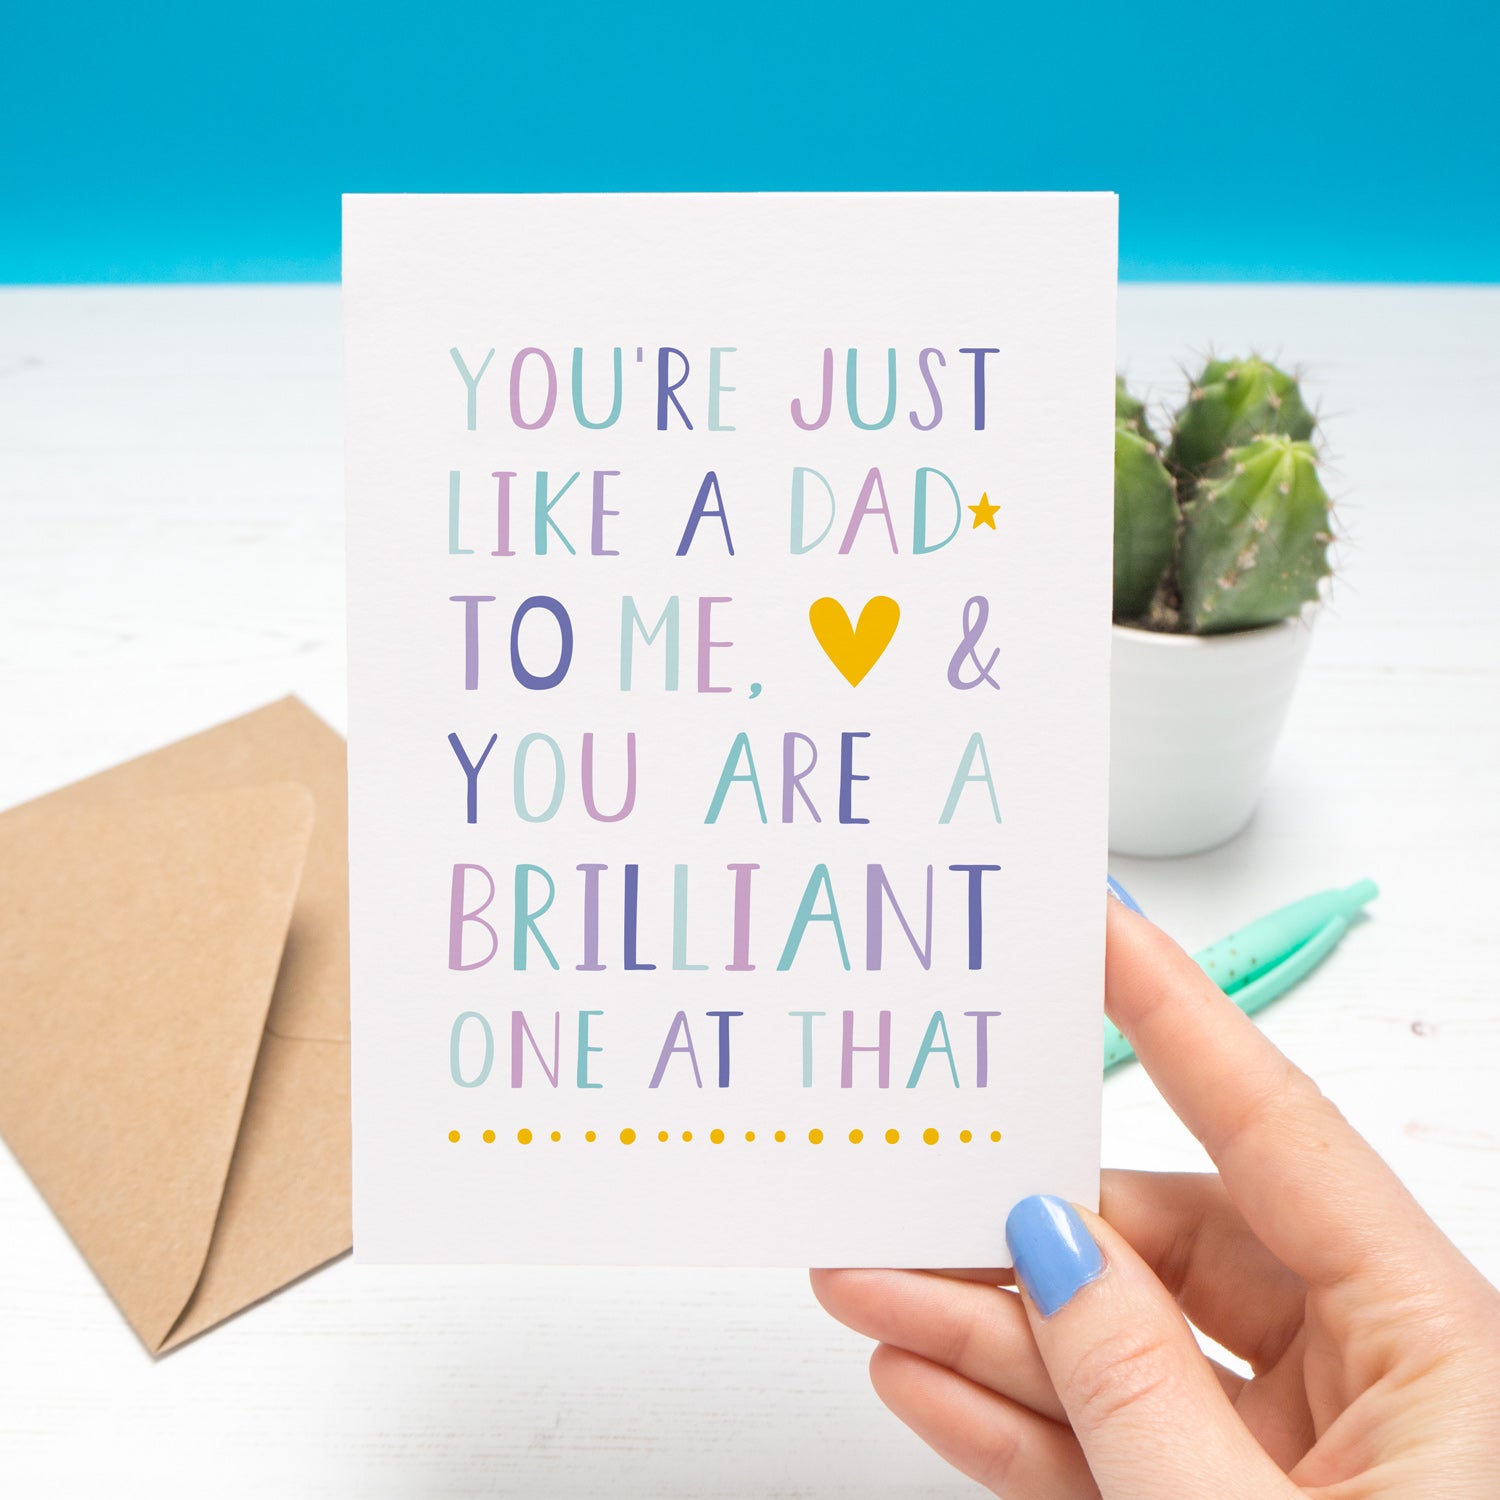 'You're just like a dad to me and you are a brilliant one at that' - plain card in purple & blue